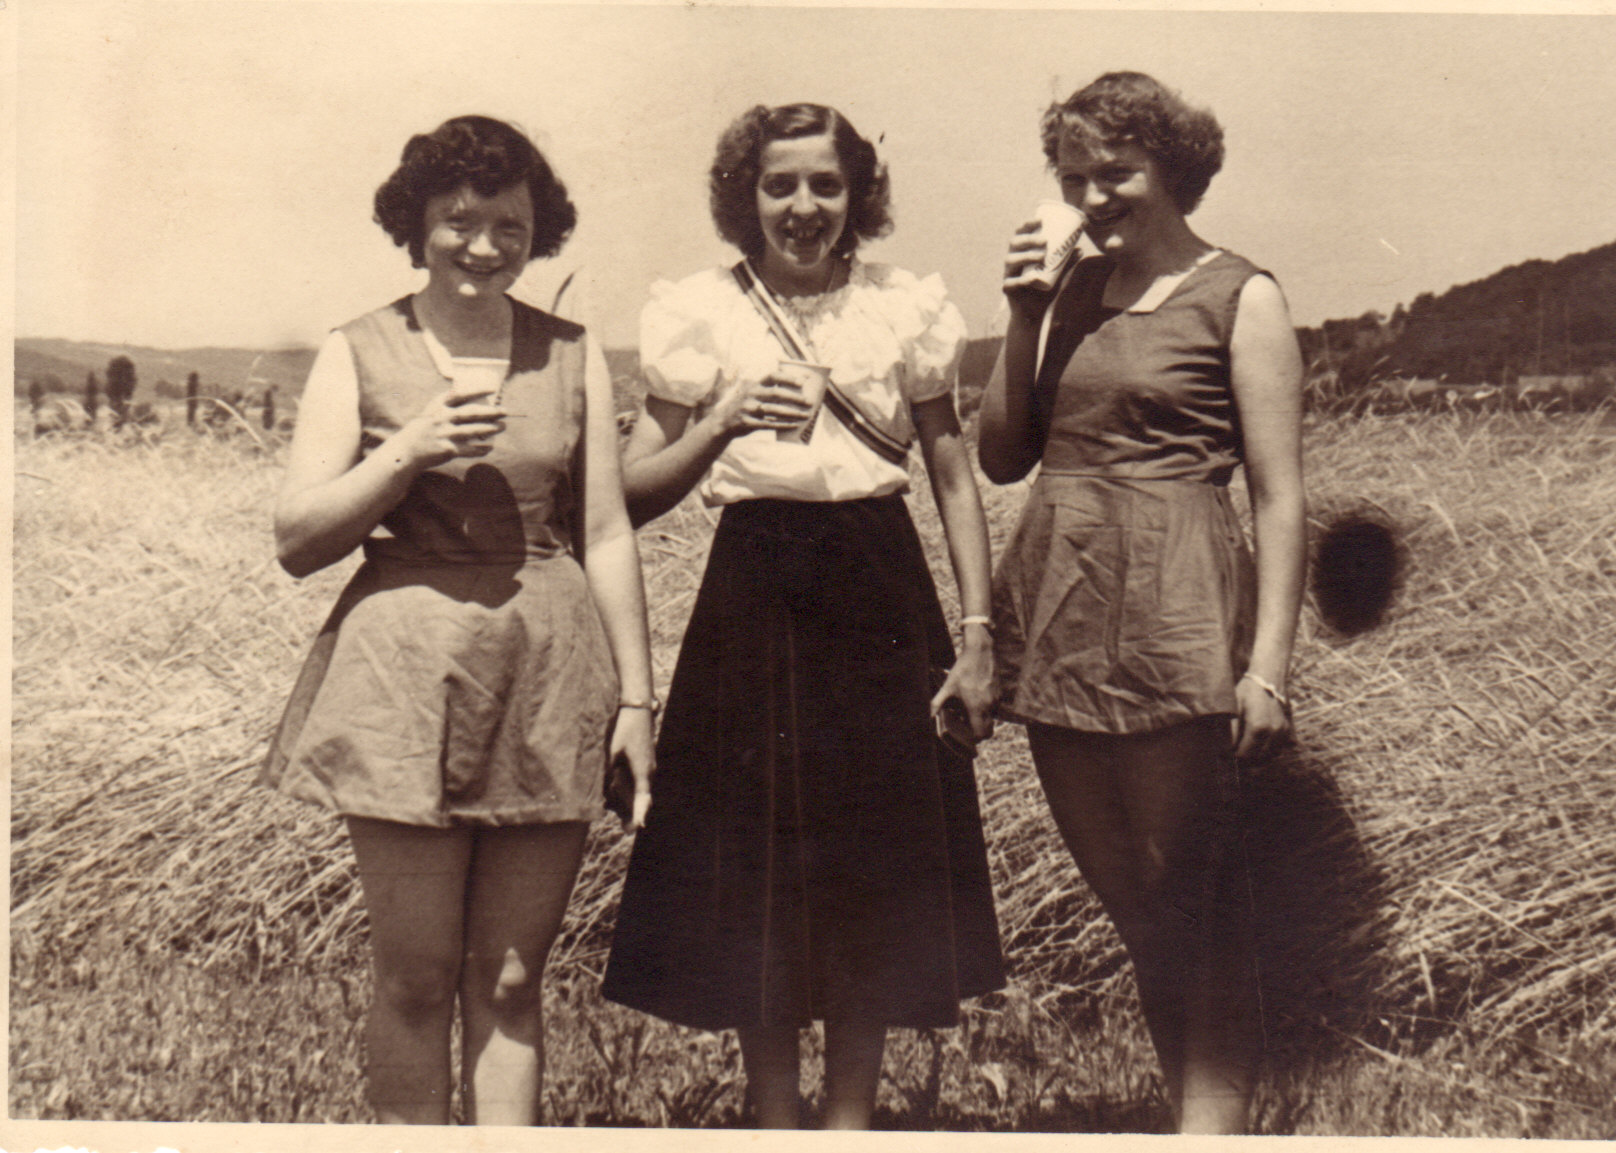 My Mom (on the left) and her sister Sophie (on the right) and a friend 1949 (Sports event).